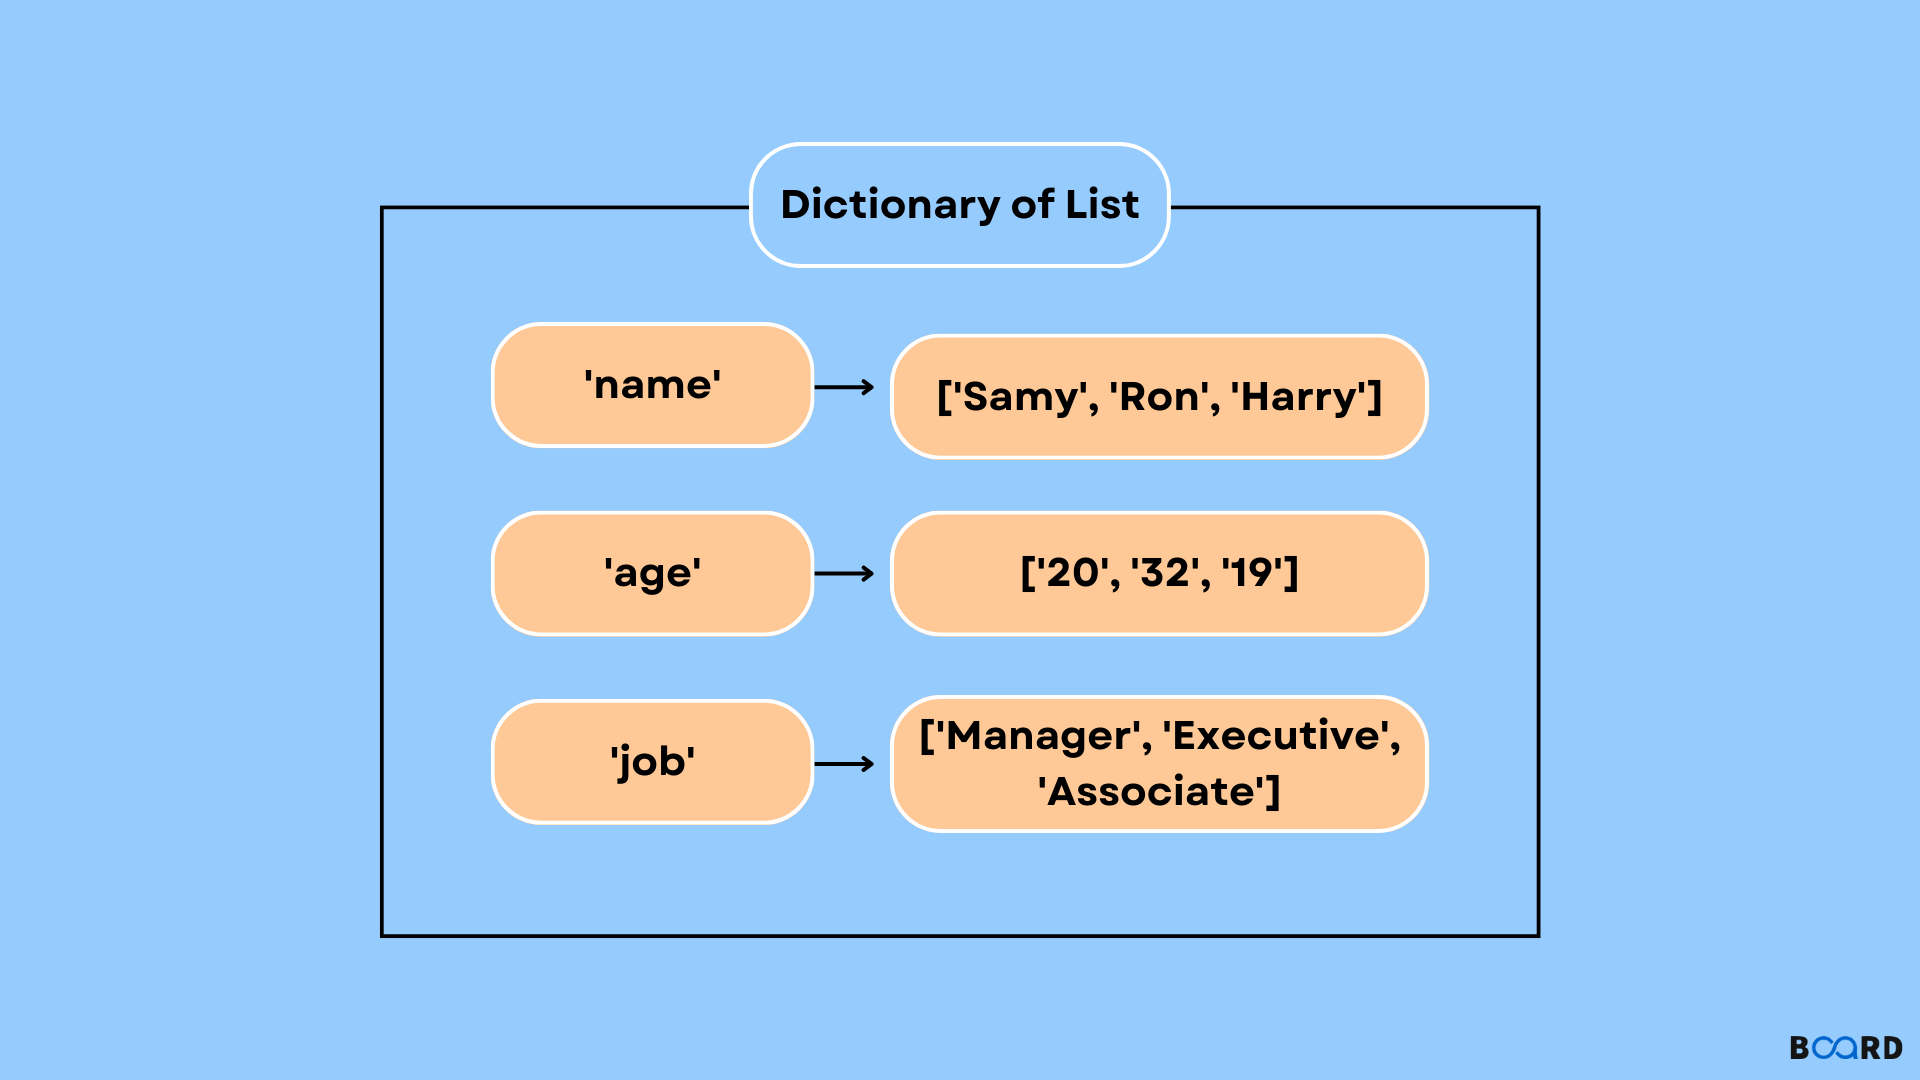 Dictionary of Lists